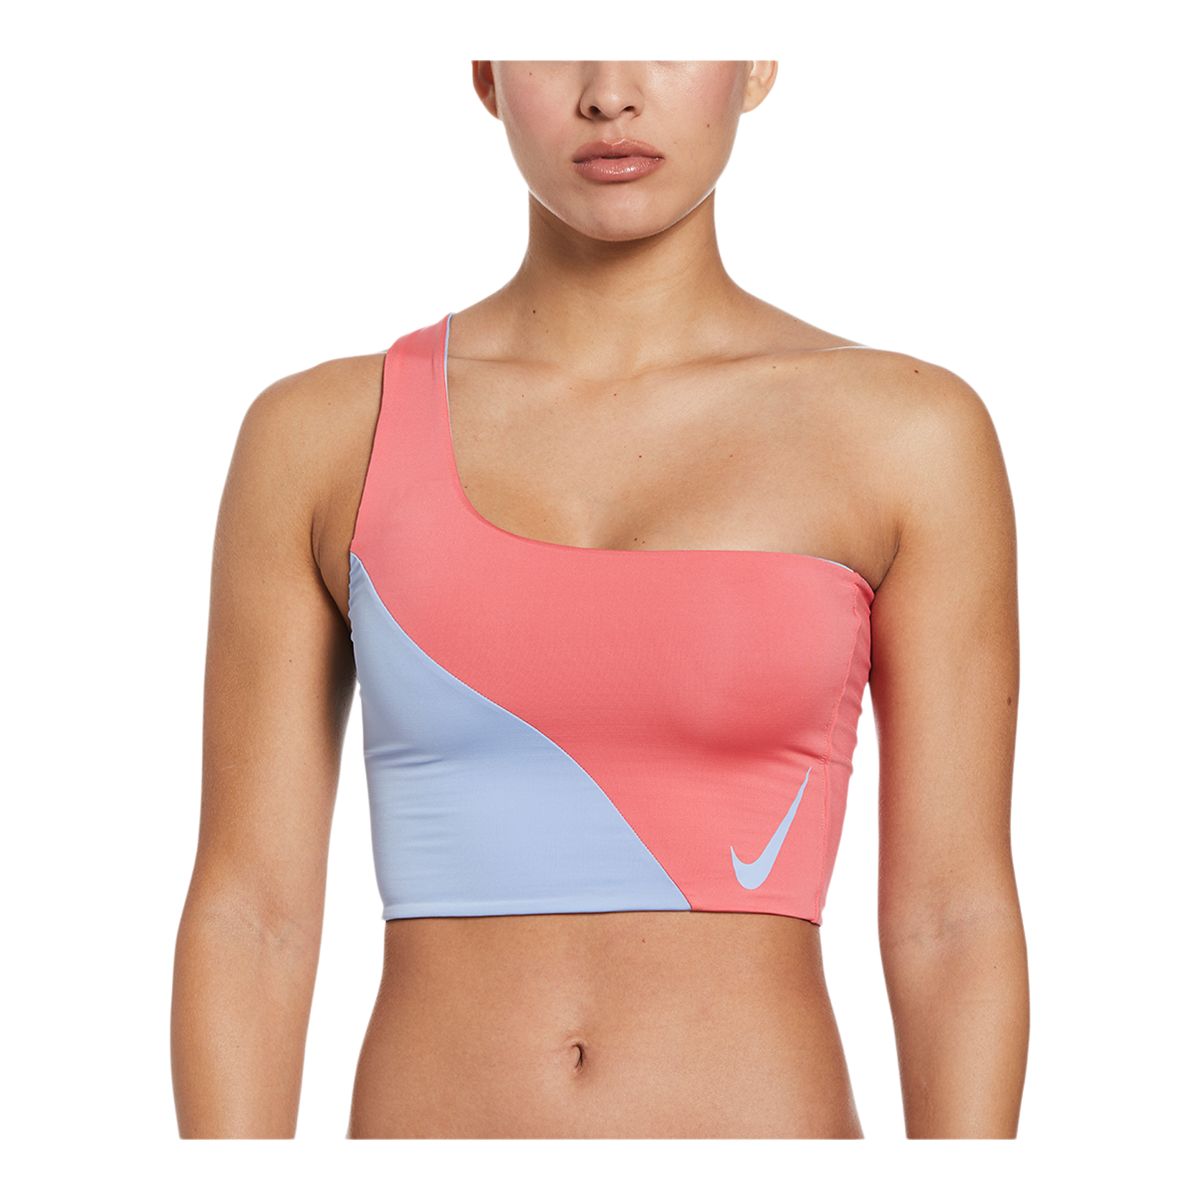 https://media-www.sportchek.ca/product/div-03-softgoods/dpt-70-athletic-clothing/sdpt-02-womens/334133904/nike-w-3in1-top-q123-pnk-0869ad35-7d98-443f-9b1c-8e990ce86777-jpgrendition.jpg?imdensity=1&imwidth=1244&impolicy=mZoom